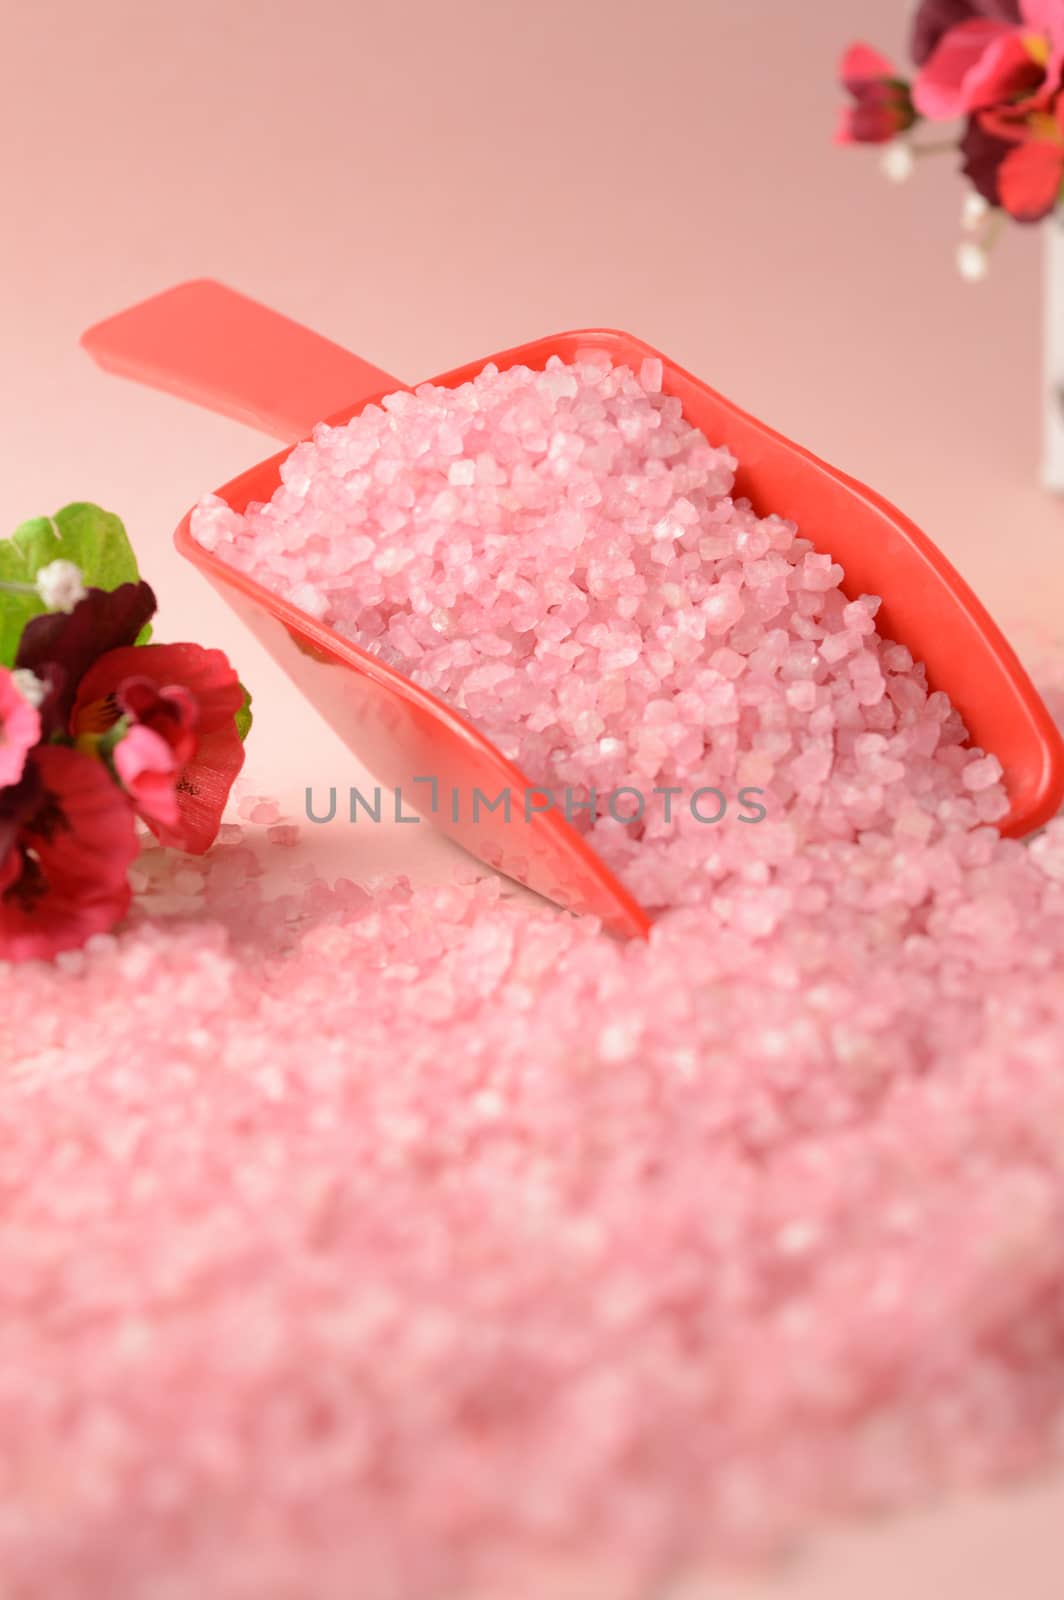 A scoop of cleansing pink bath salts to add to your hygiene routine.